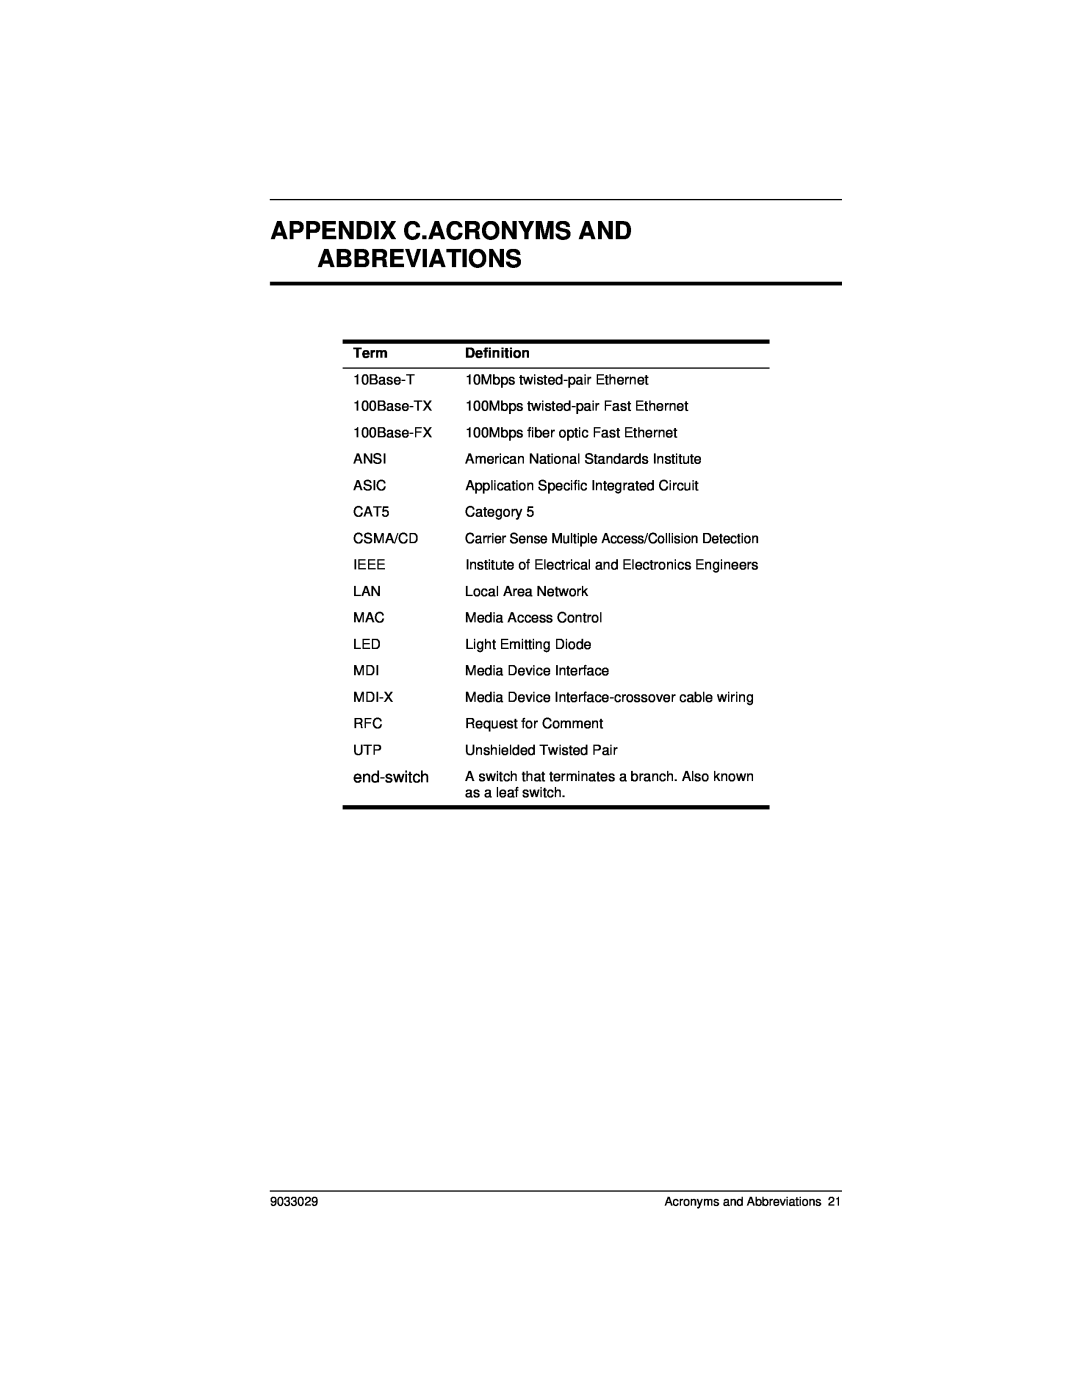 Cabletron Systems ELS100-8TXUF2 manual Appendix C.Acronyms And Abbreviations, end-switch 